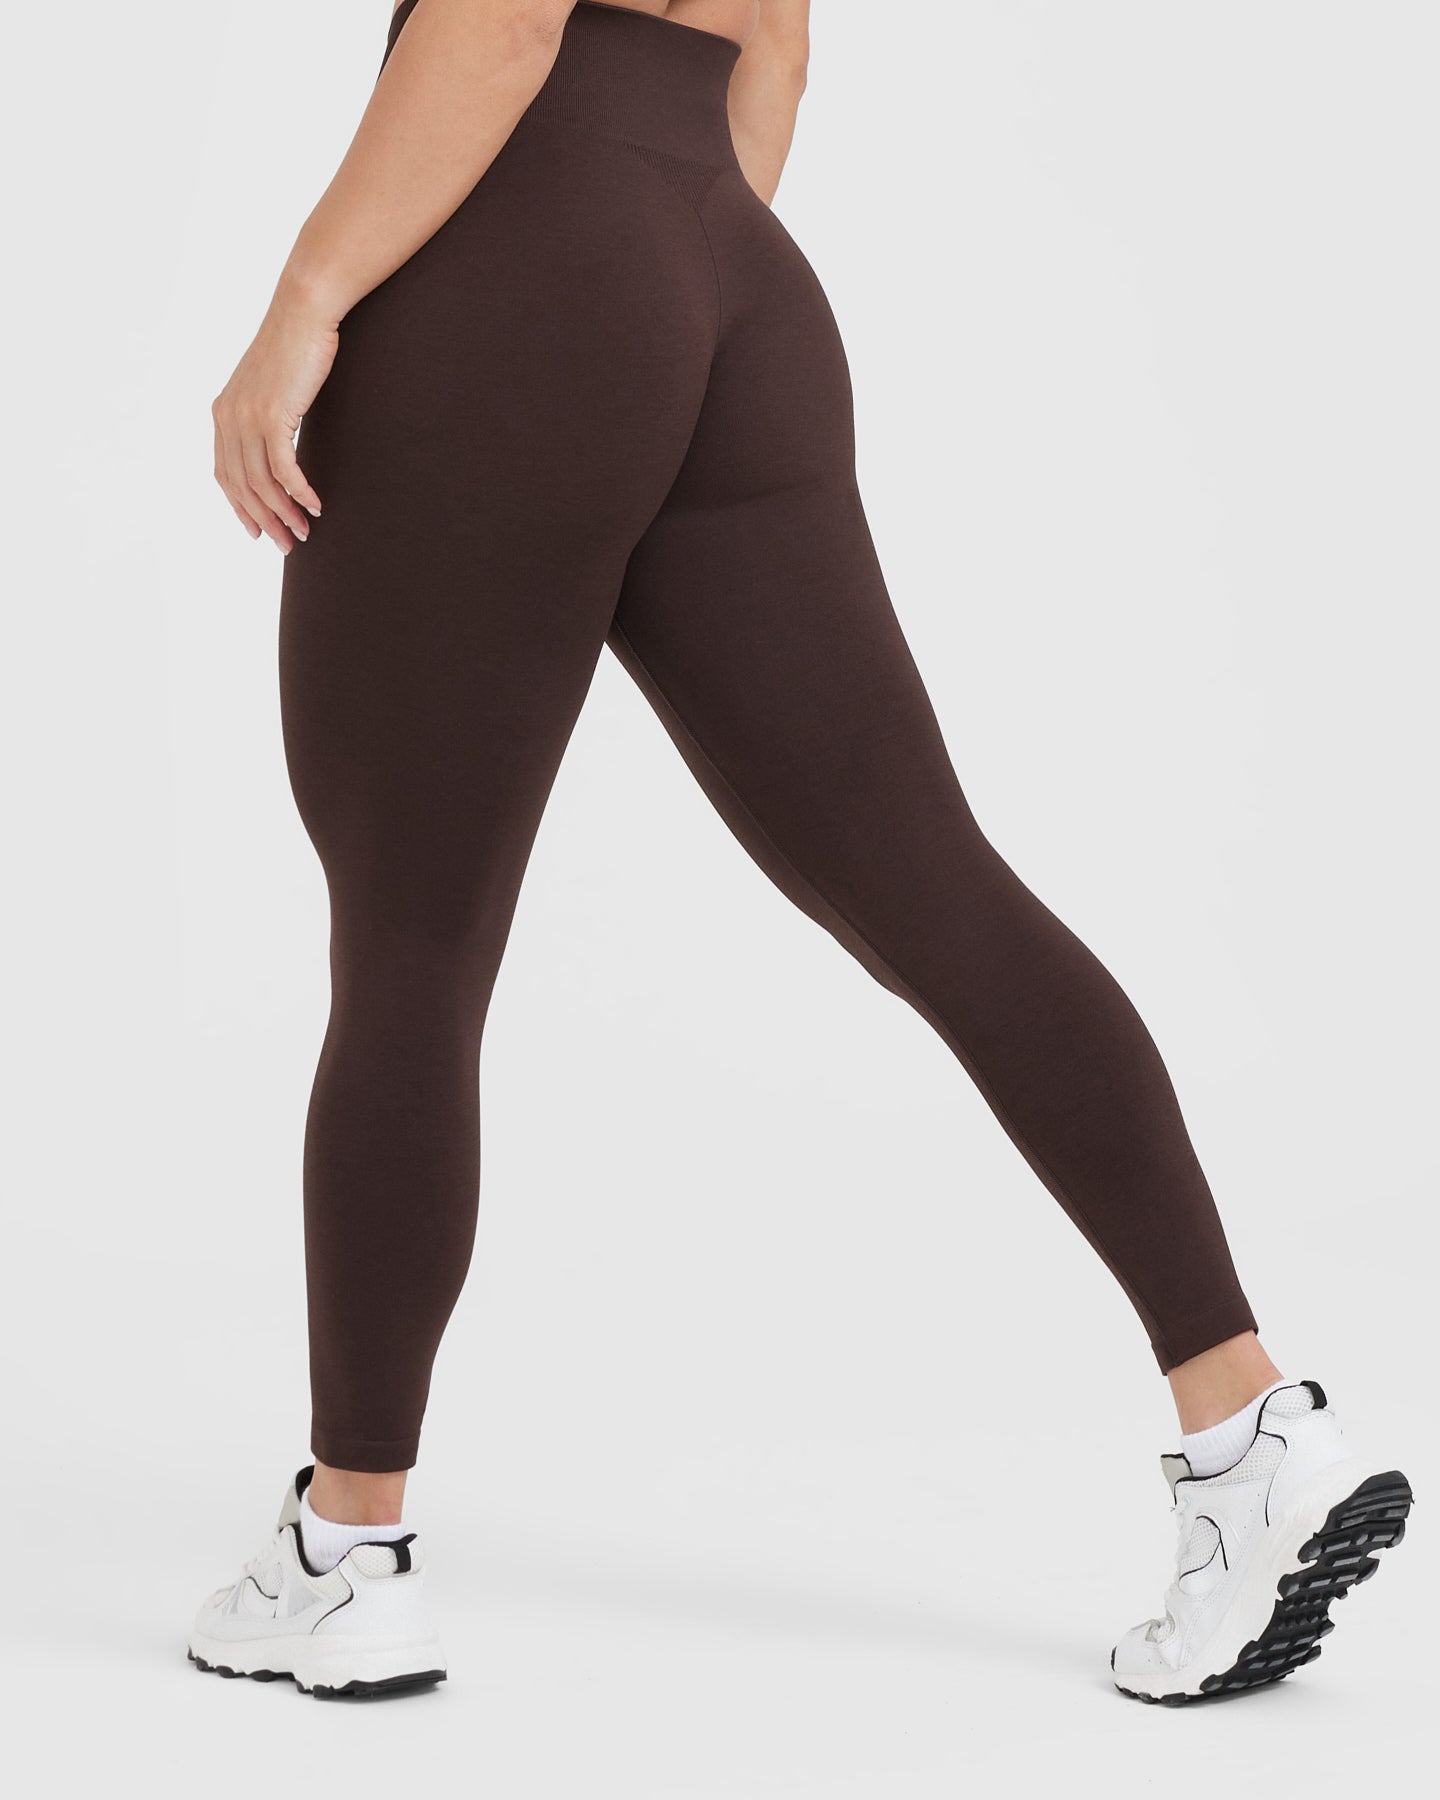 Classic | 70% Leggings Active Oner Marl US 2.0 Seamless Cocoa